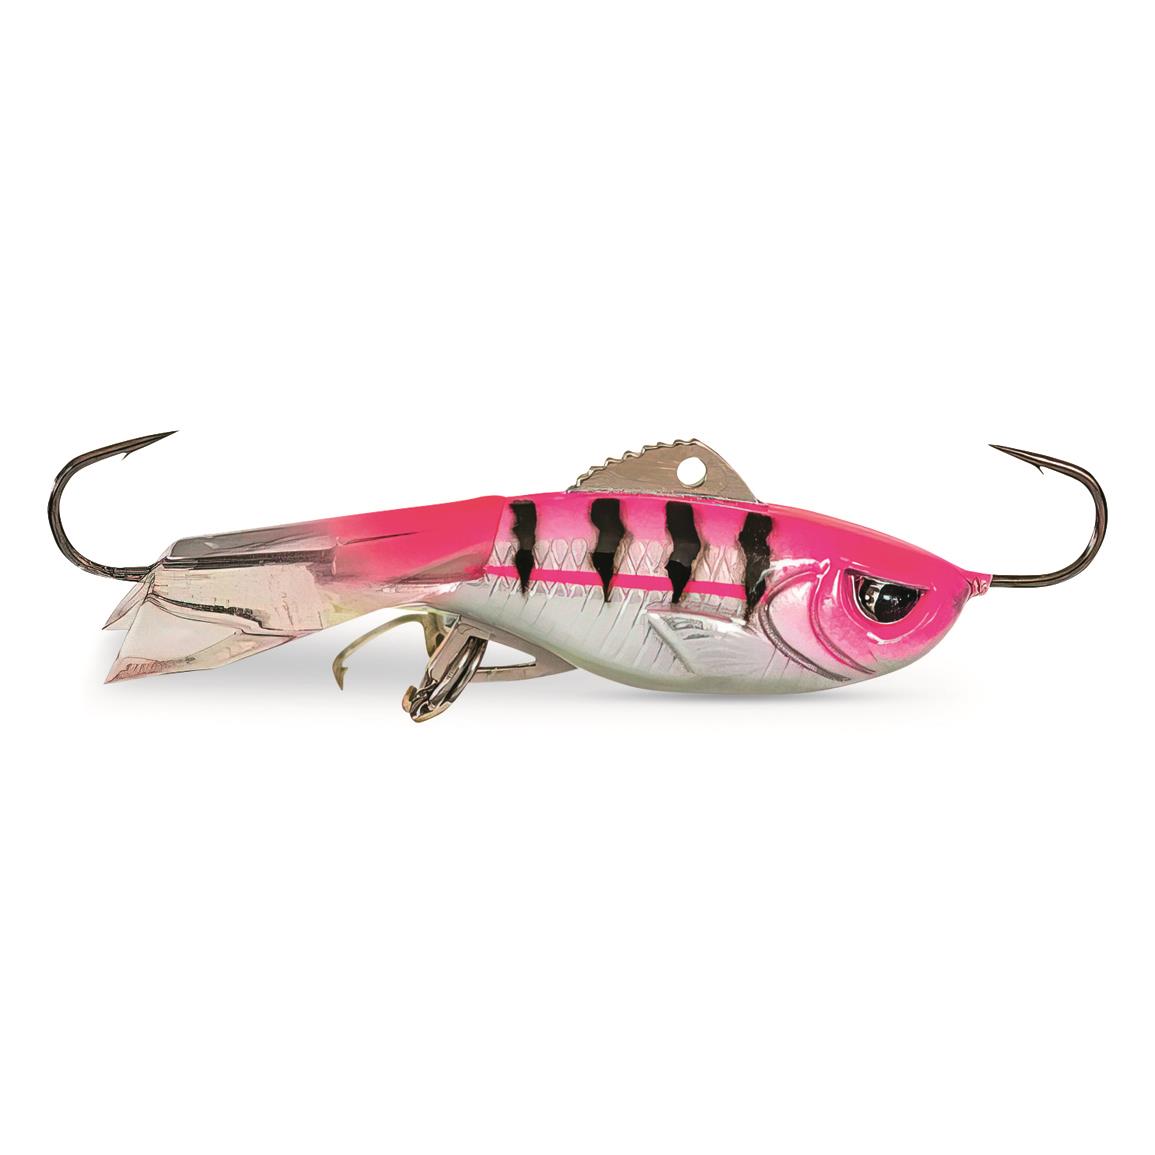 ACME Rattlin' Google Eye Tungsten Jig - 735846, Ice Tackle at Sportsman's  Guide